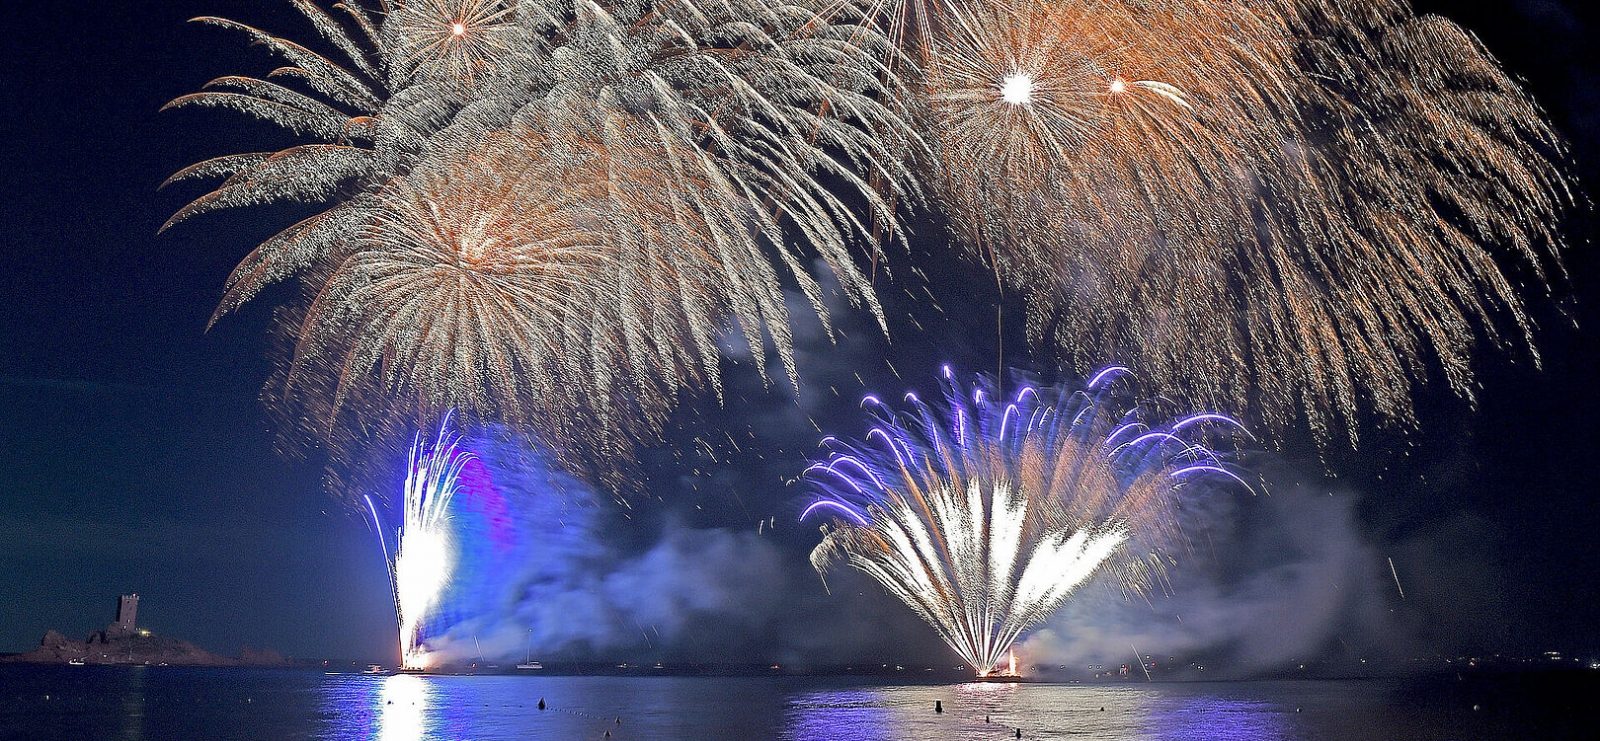 Fireworks on 14th July